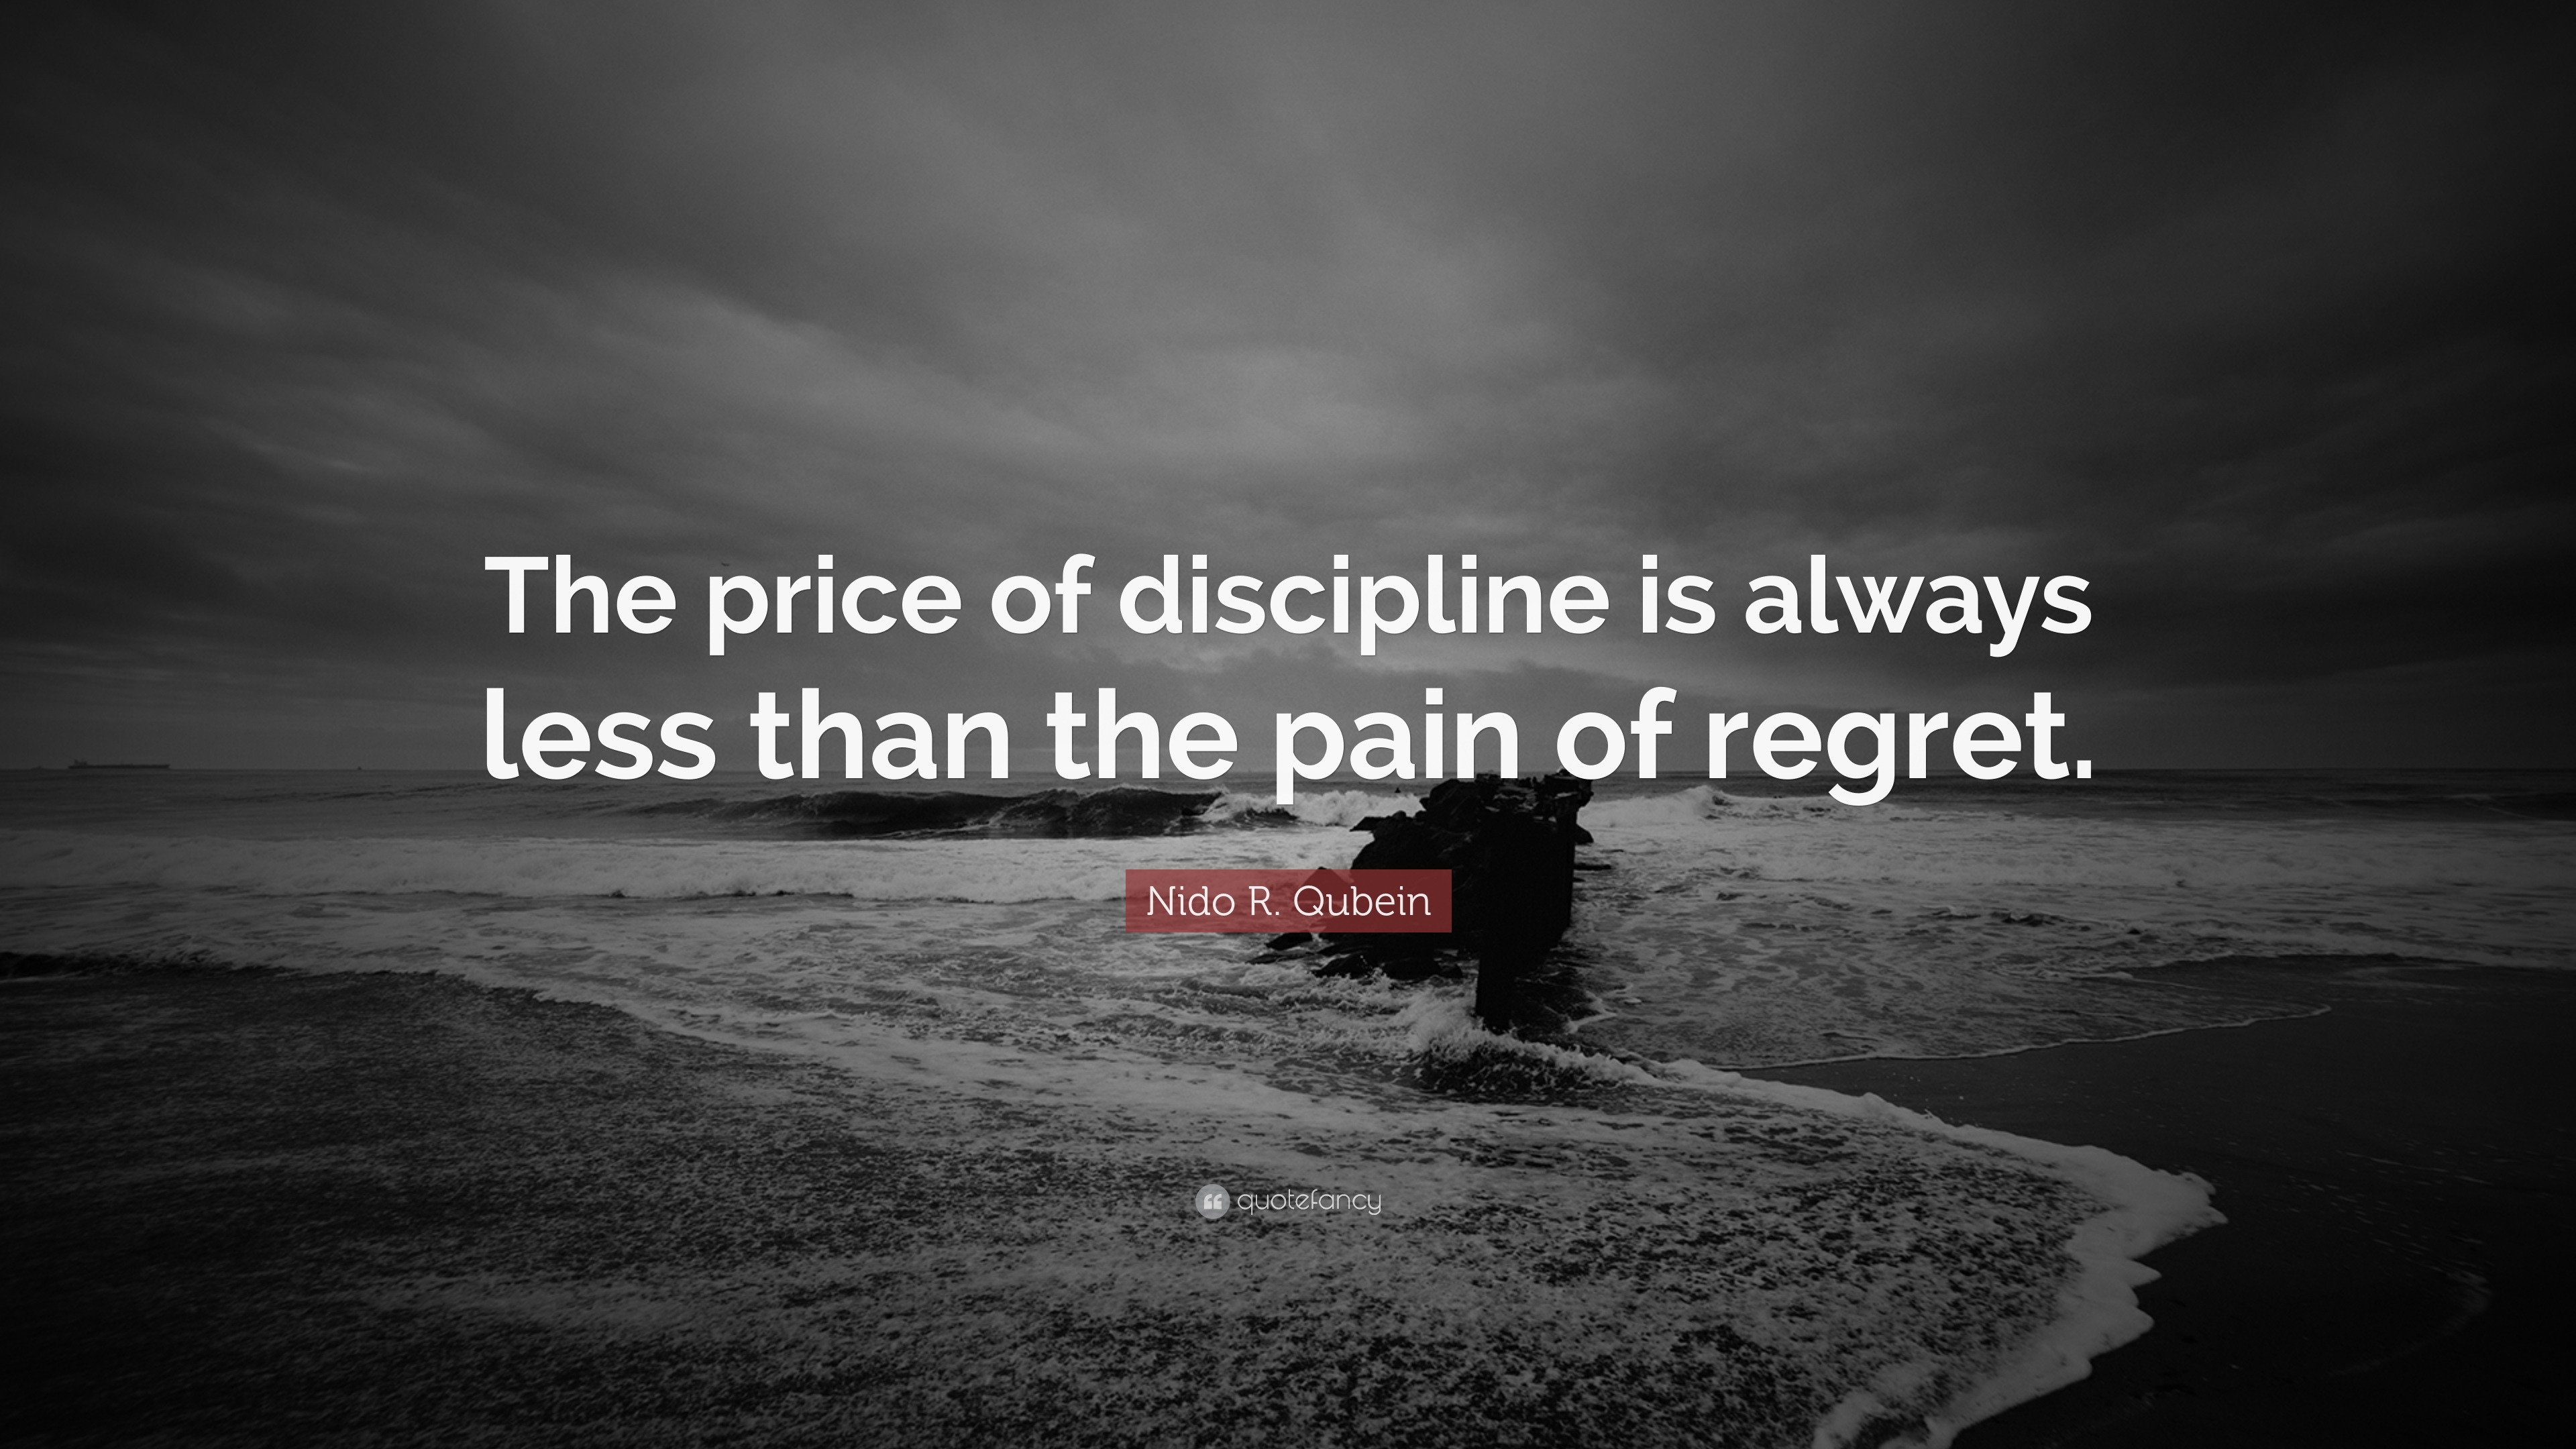 4691377 Nido R Qubein Quote The price of discipline is always less than